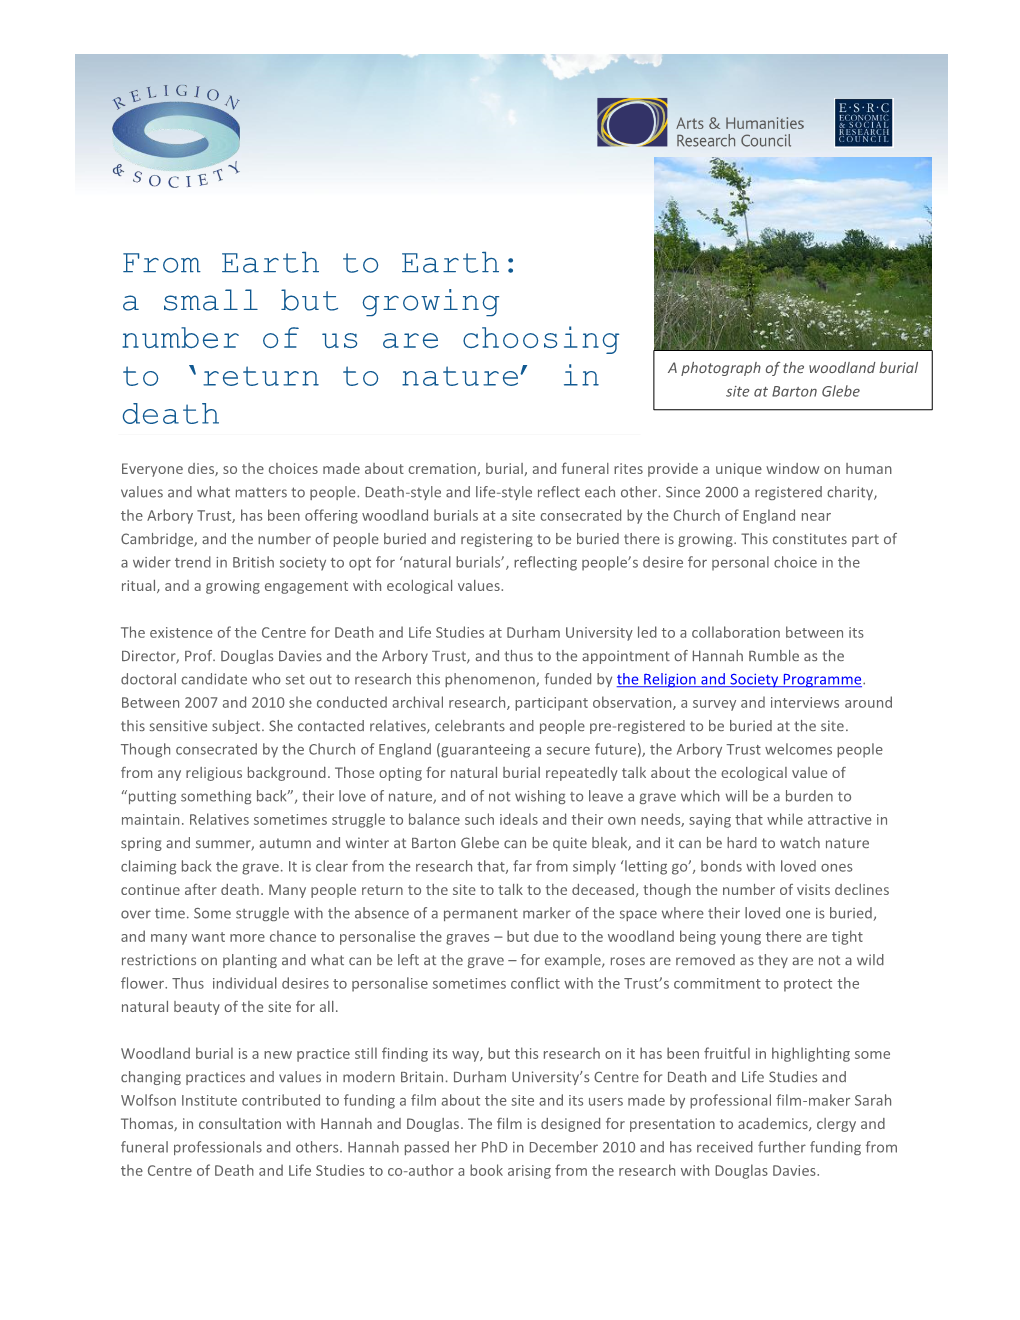 British Woodland Burial: Its Theological, Ecological and Social Values